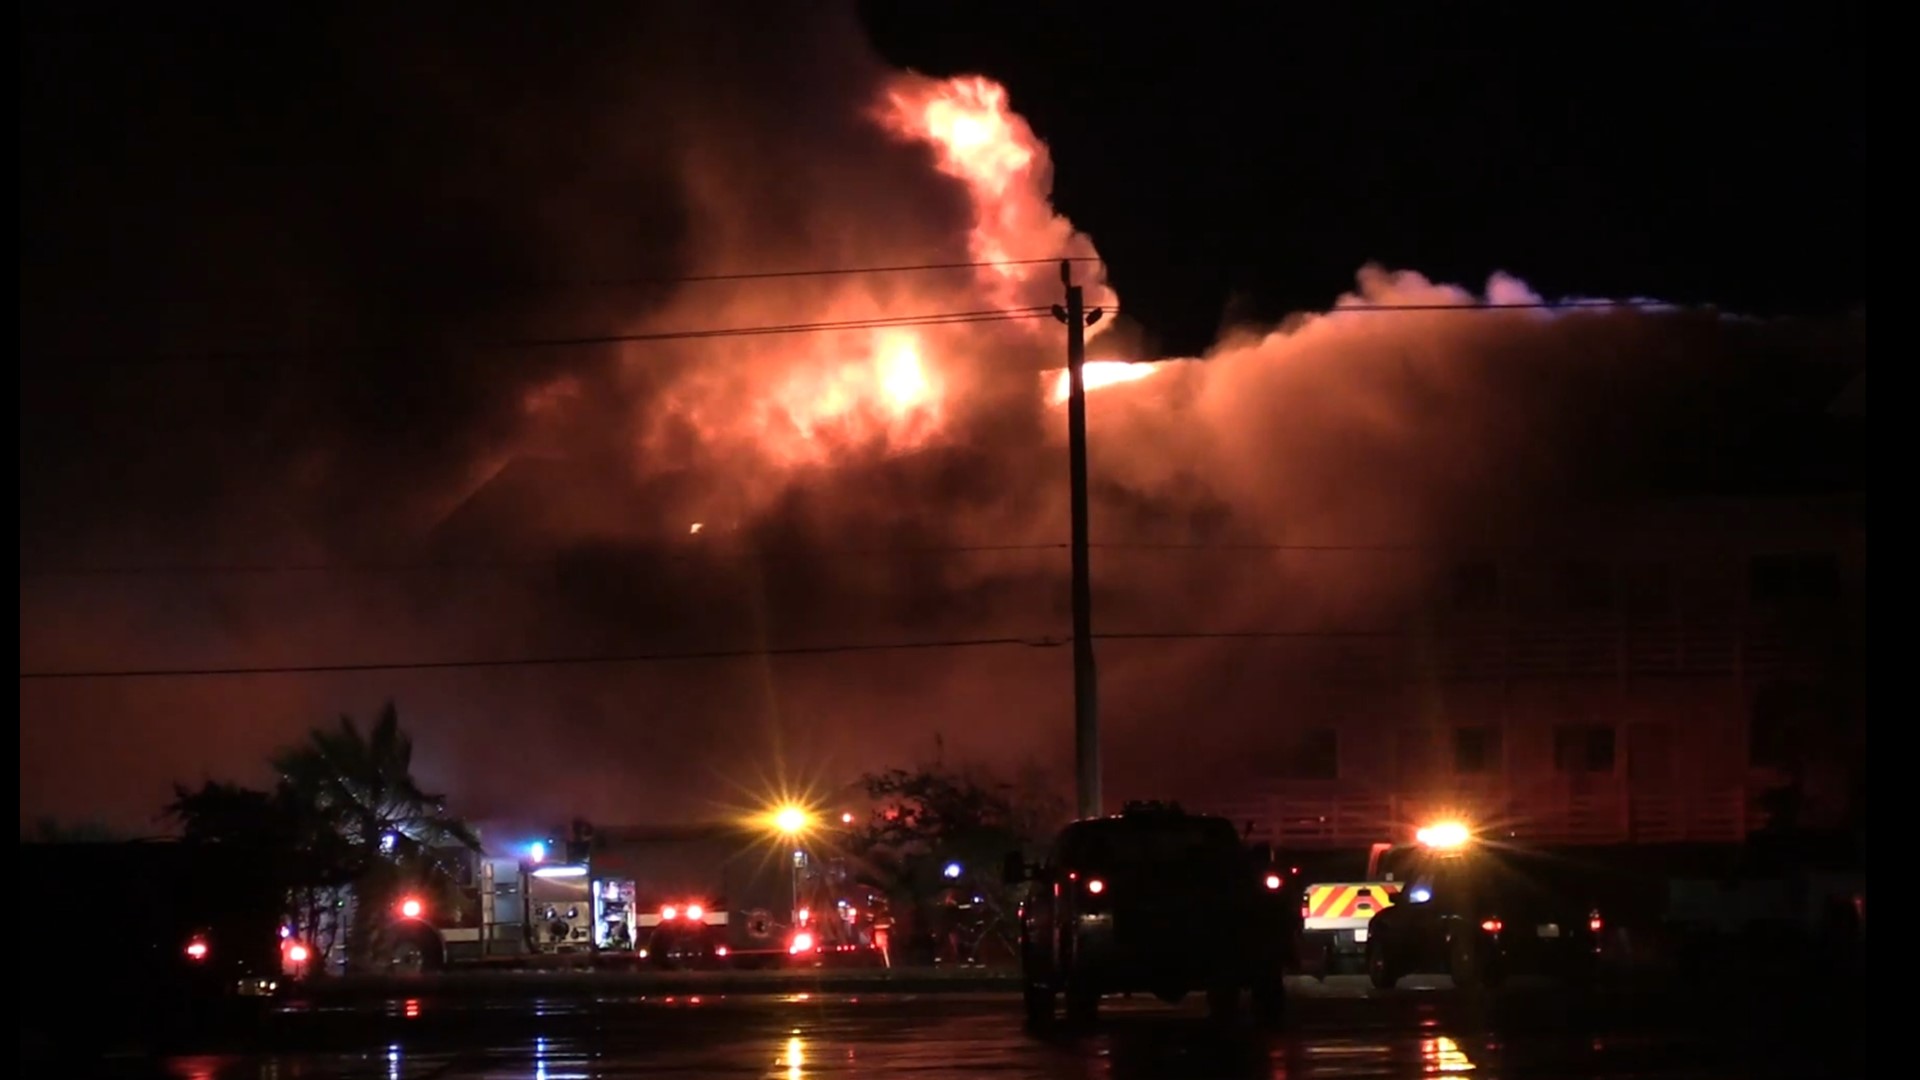 Firefighters in Galveston battled a big fire at the Inn at the Waterpark hotel on Jones Road Friday night.